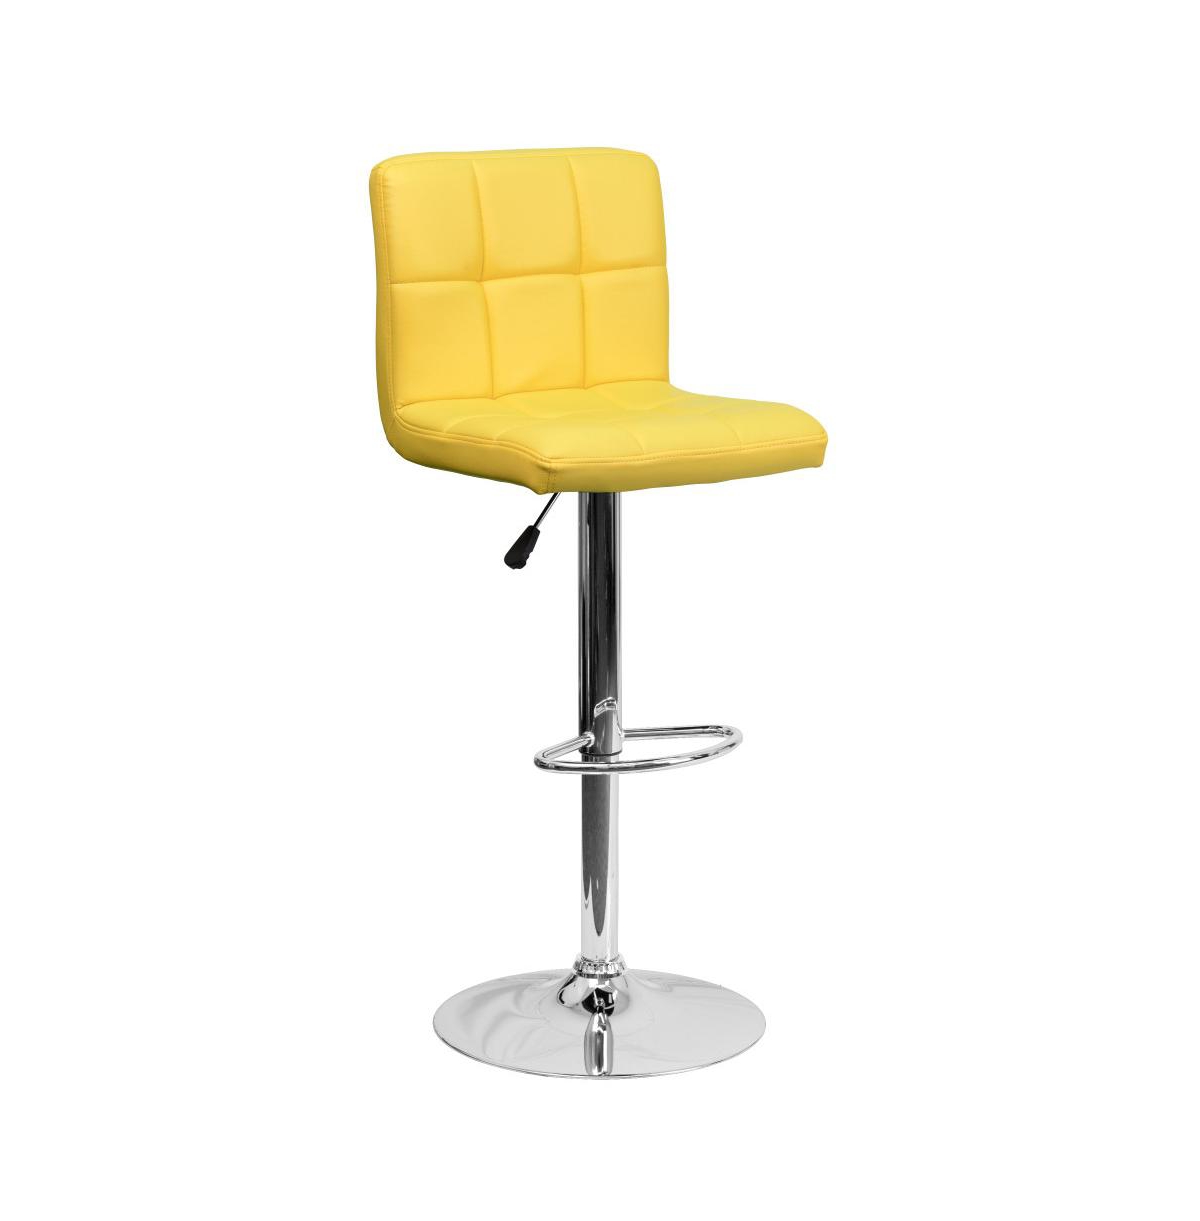 Emma+oliver Quilted Vinyl Swivel Adjustable Height Barstool With Chrome Base In Yellow